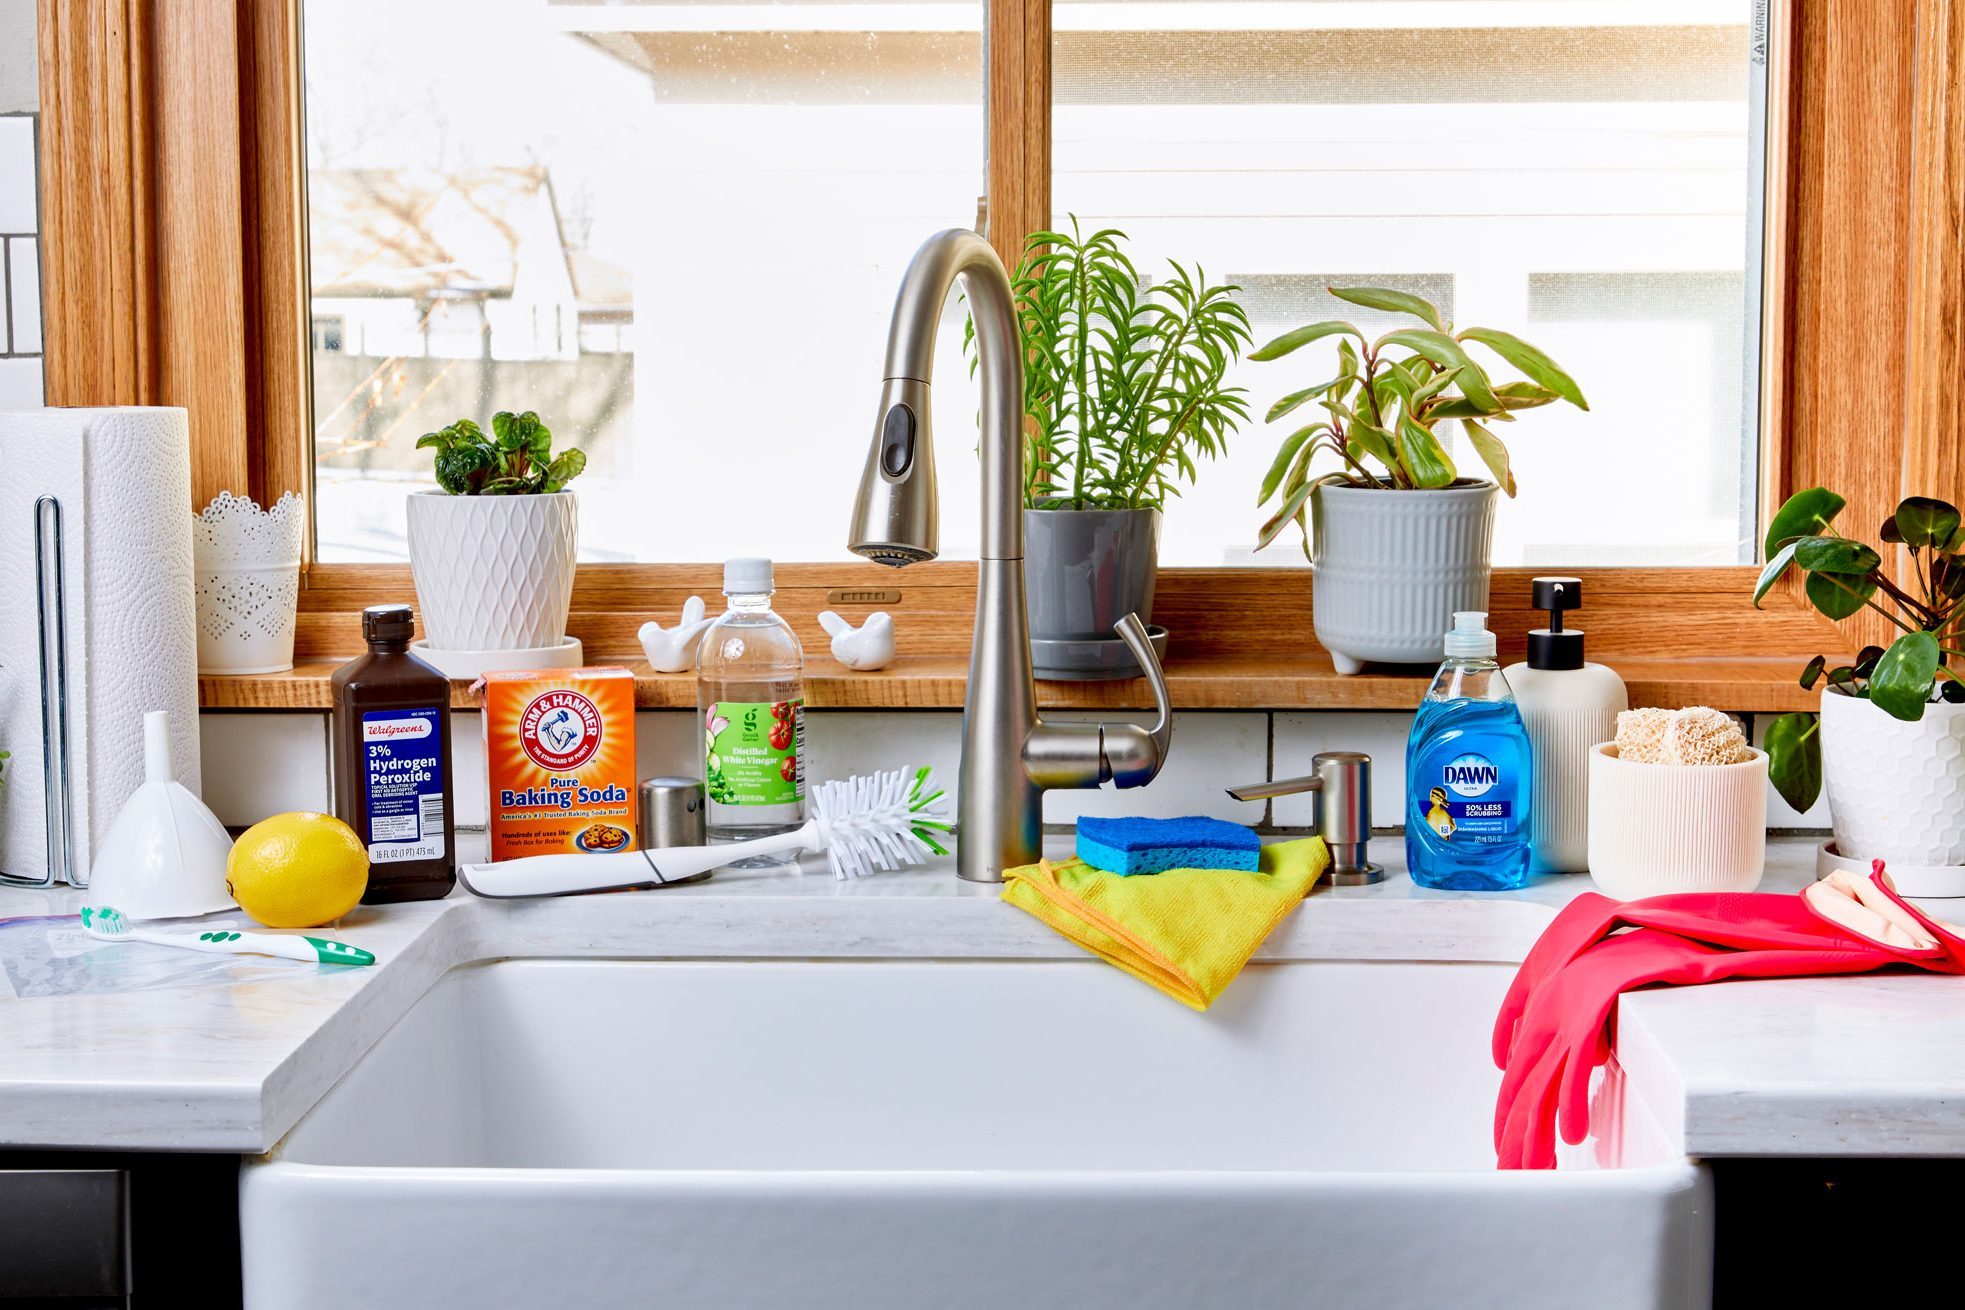 How To Unclog A Kitchen Sink With Baking Soda & Vinegar